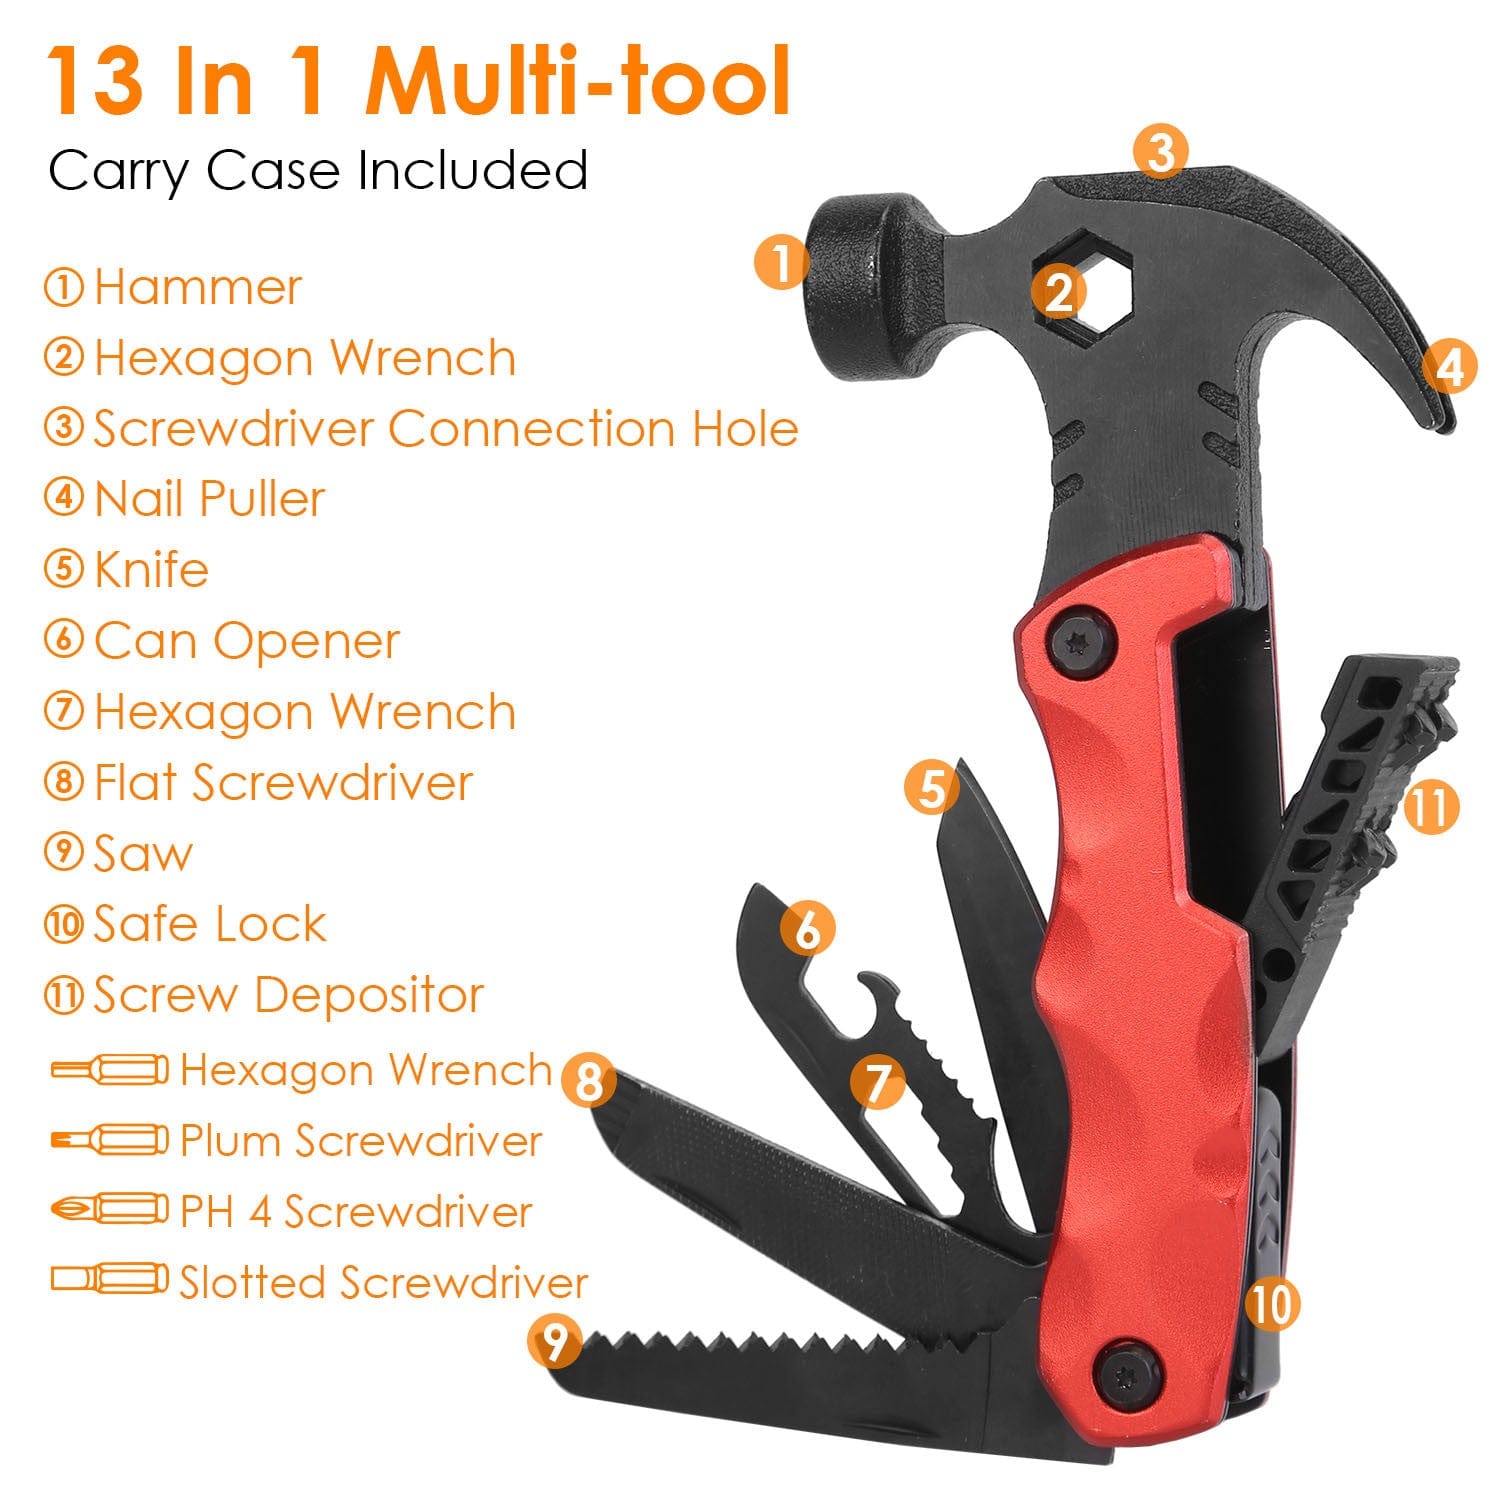 13 In 1 Multi-tool Hammer - Ultimate Outdoor Camping Survival Tools